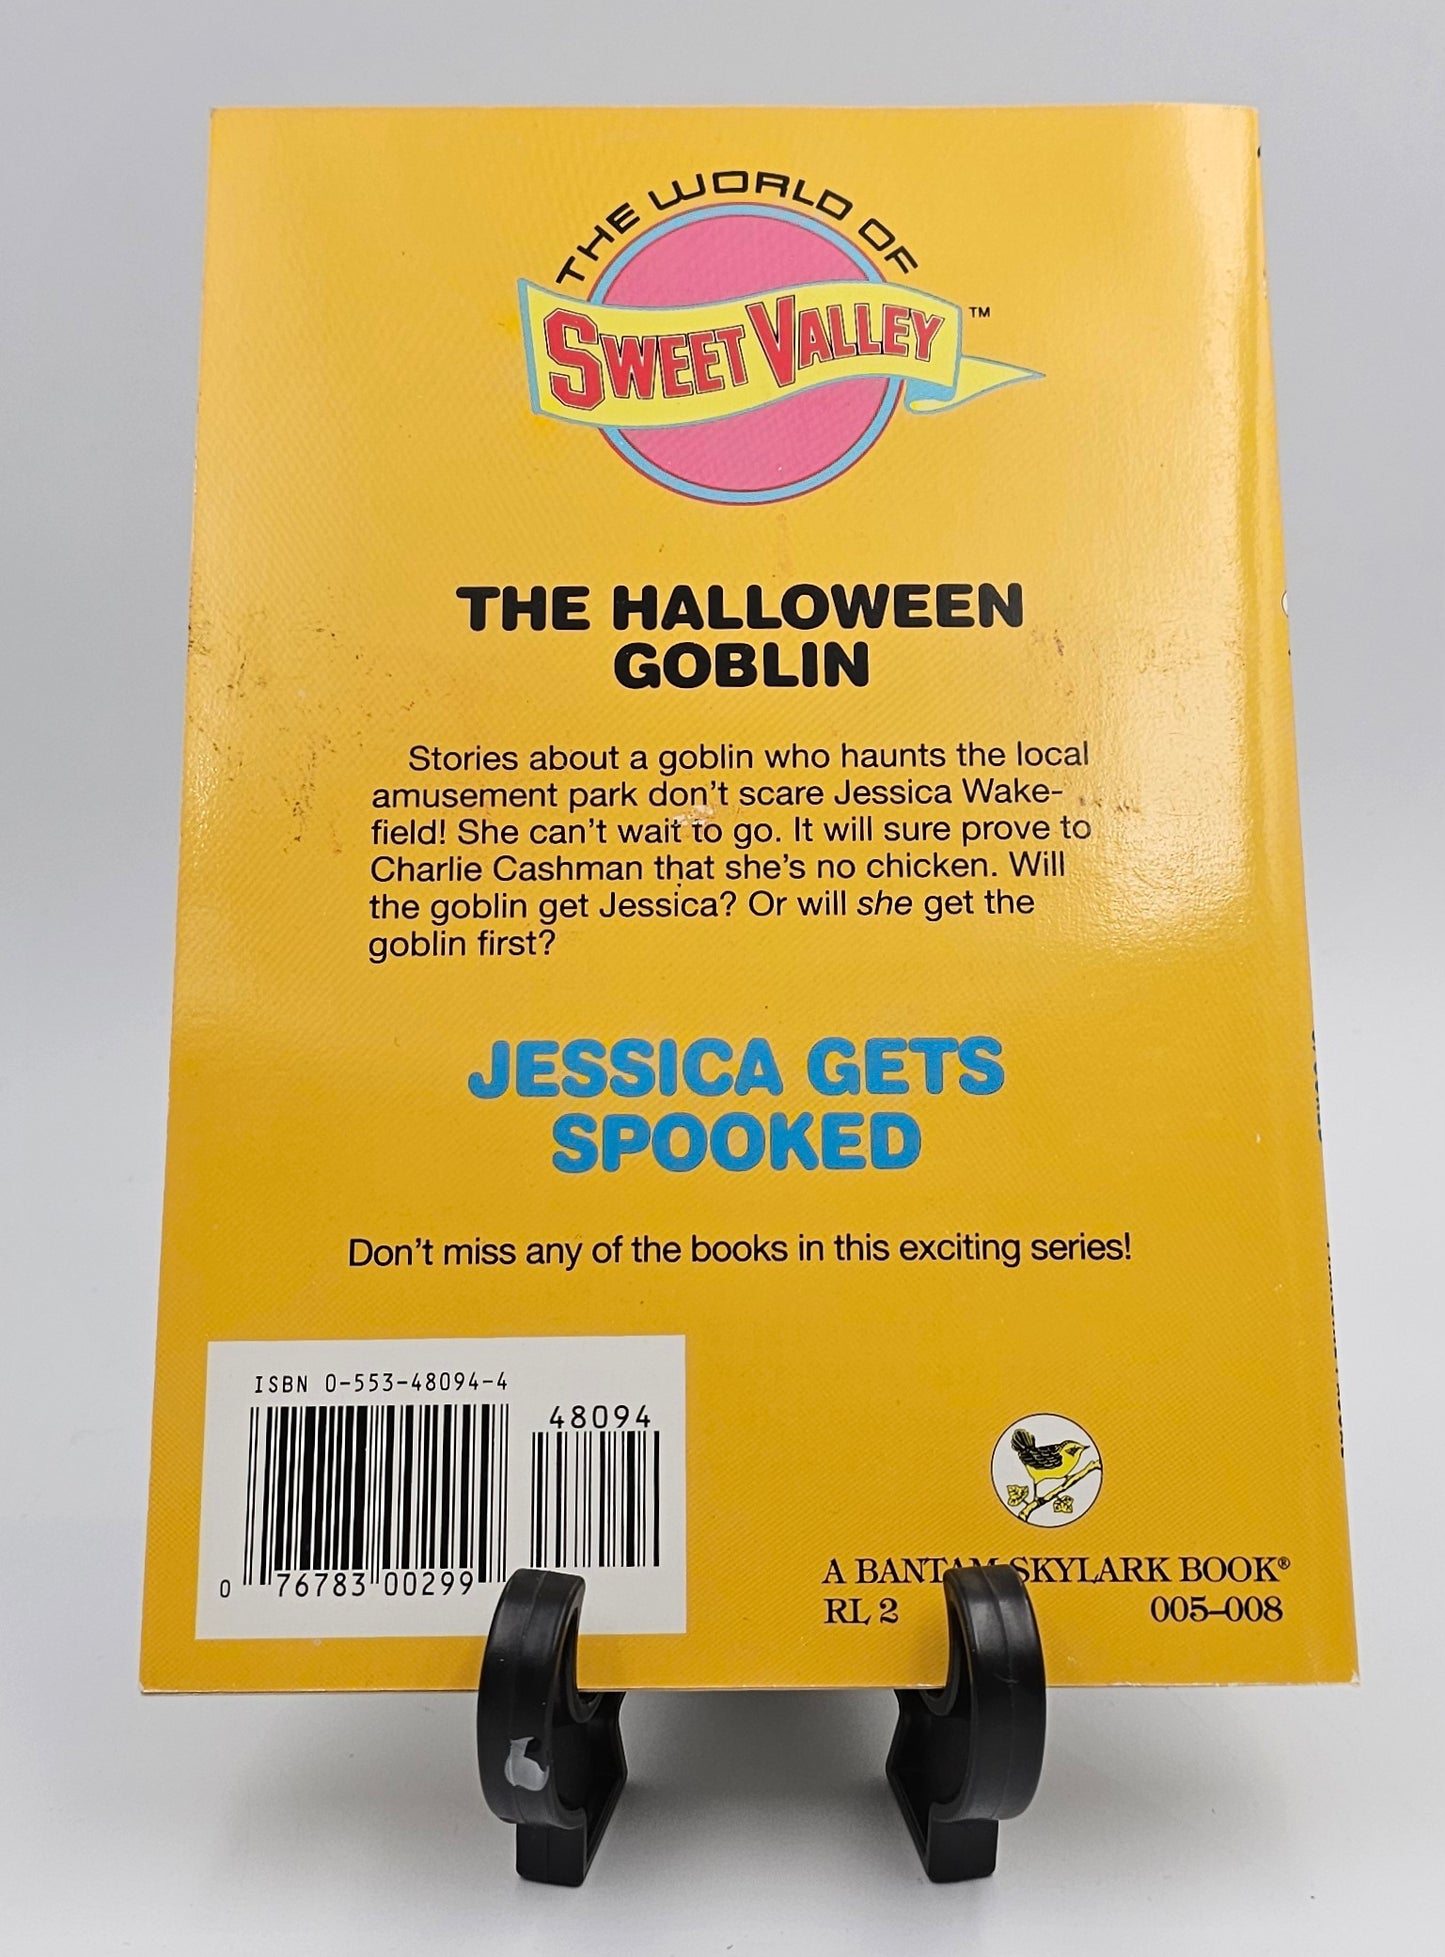 Jessica Gets Spooked By: Francine Pascal (Sweet Valley Kids Series #43)